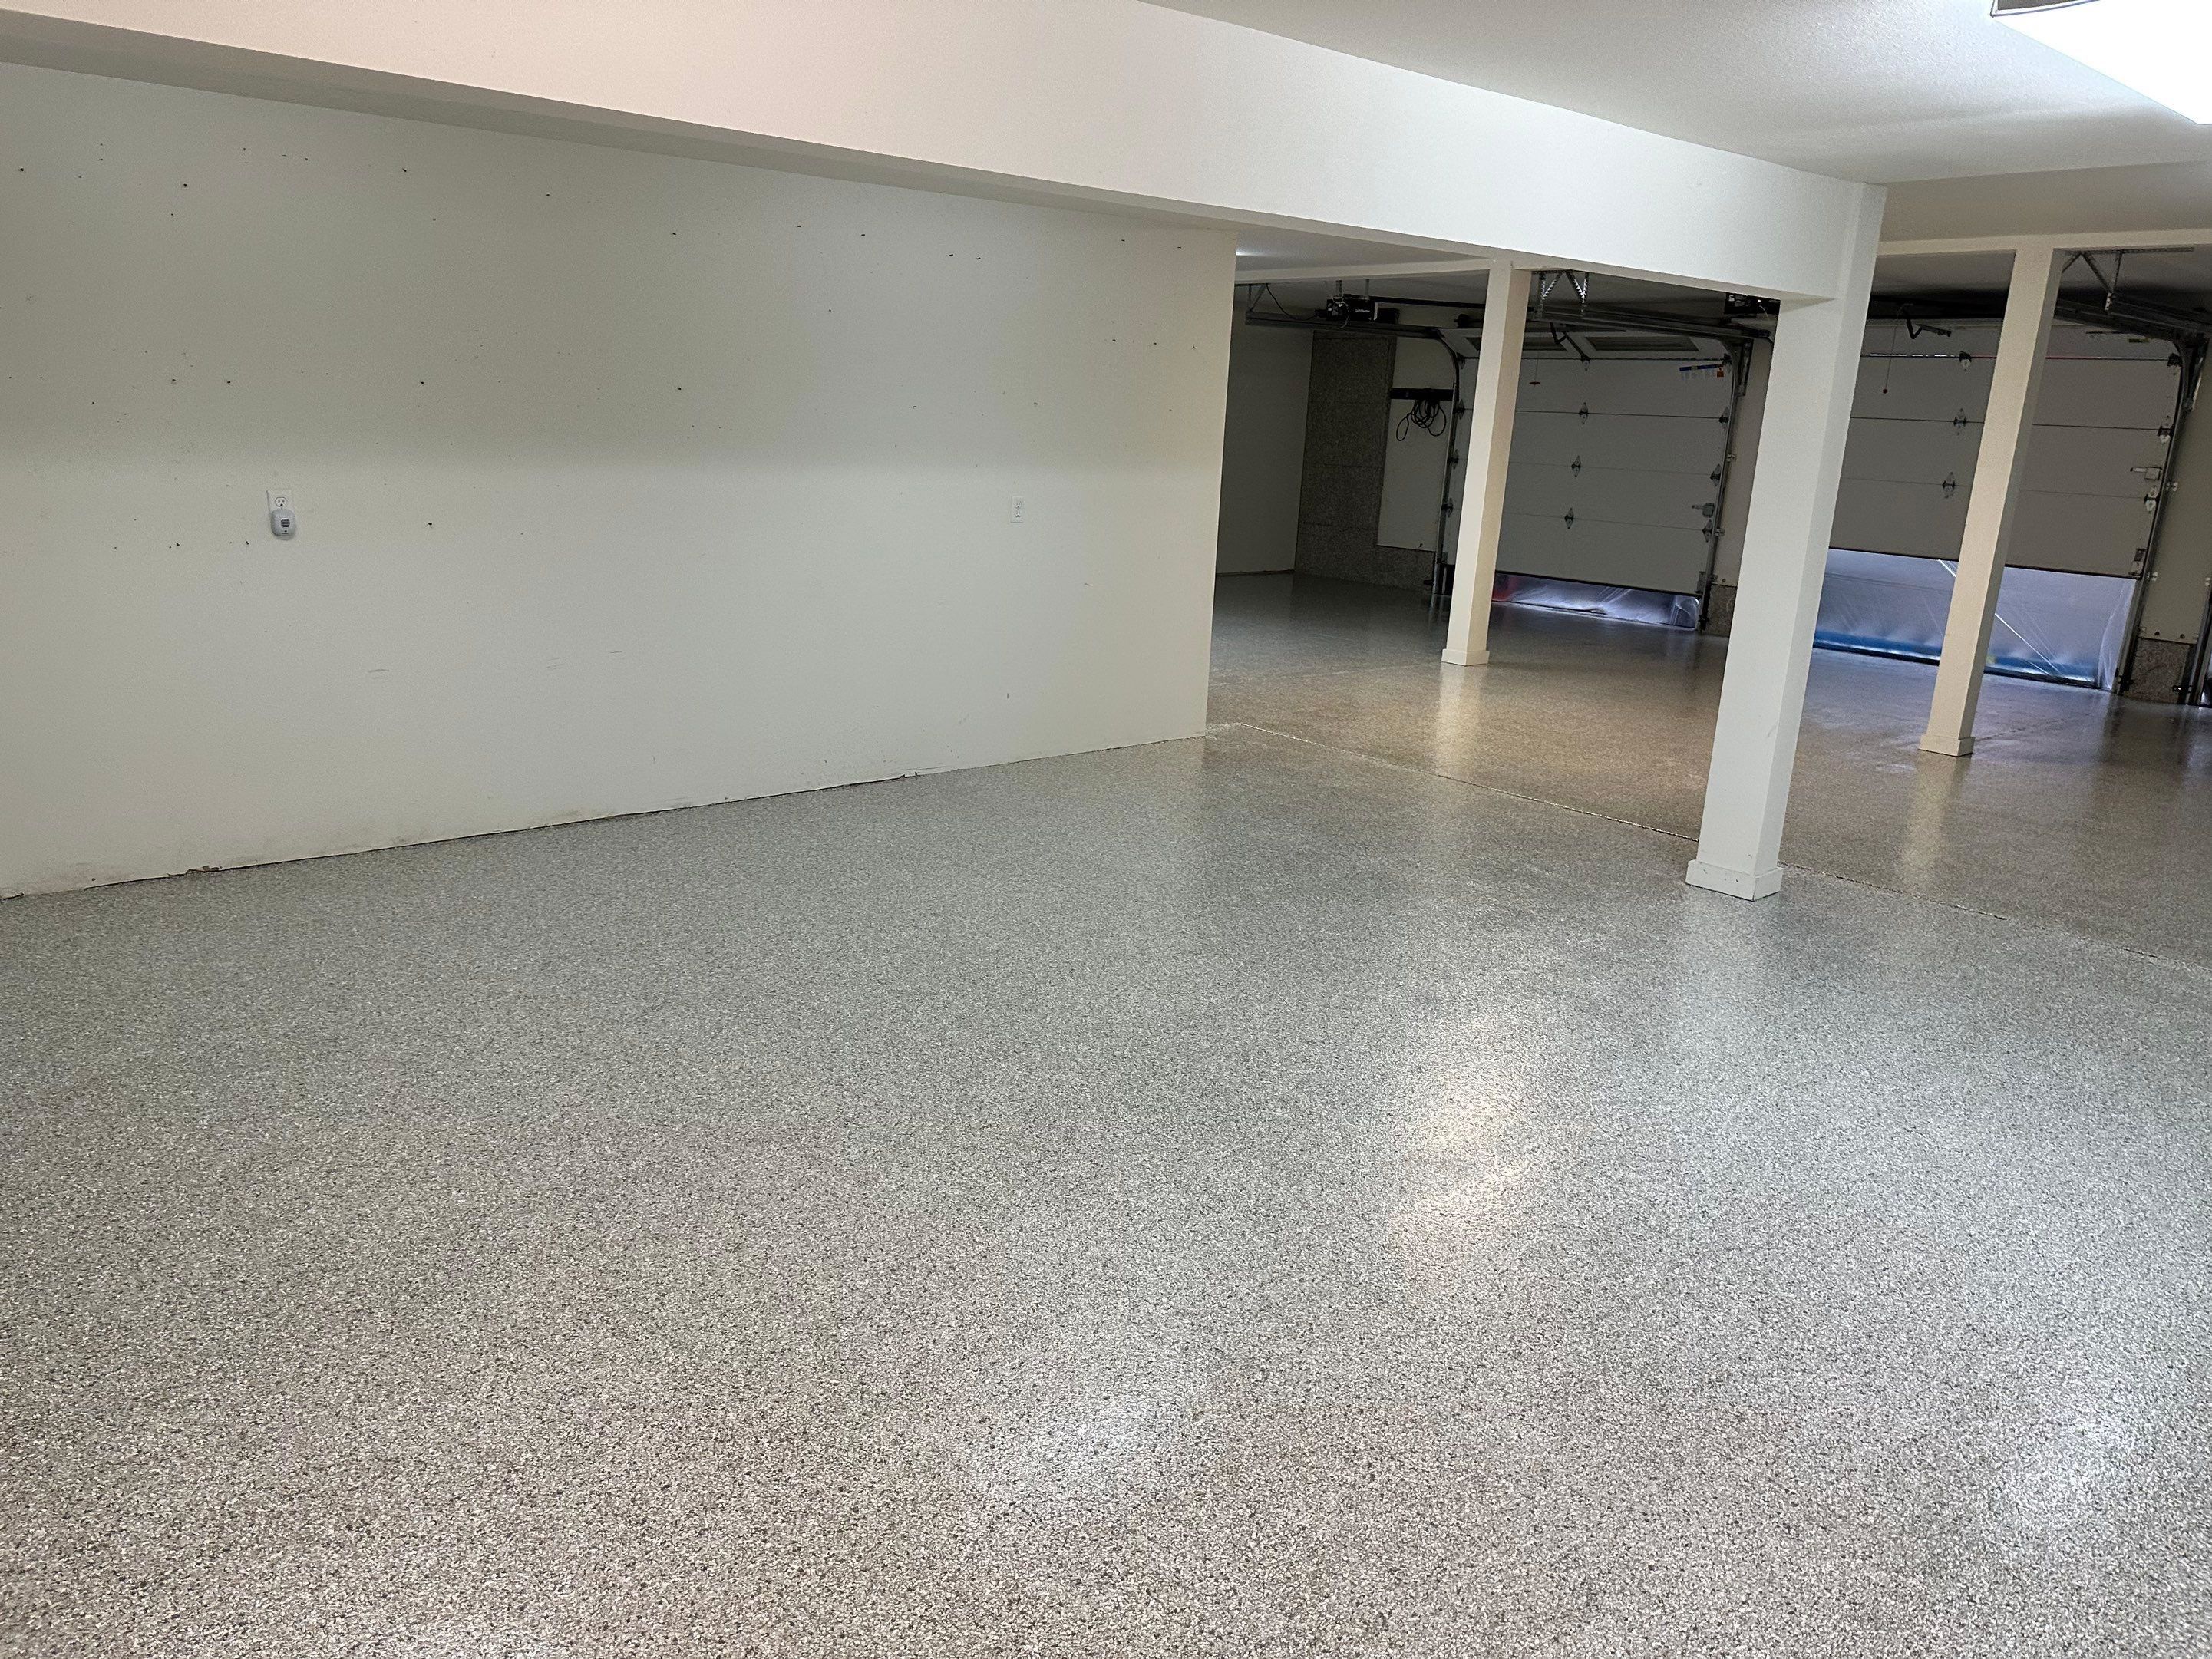 STEPS FOR PLANNING A ONE-DAY GARAGE FLOOR COATING SERVICE